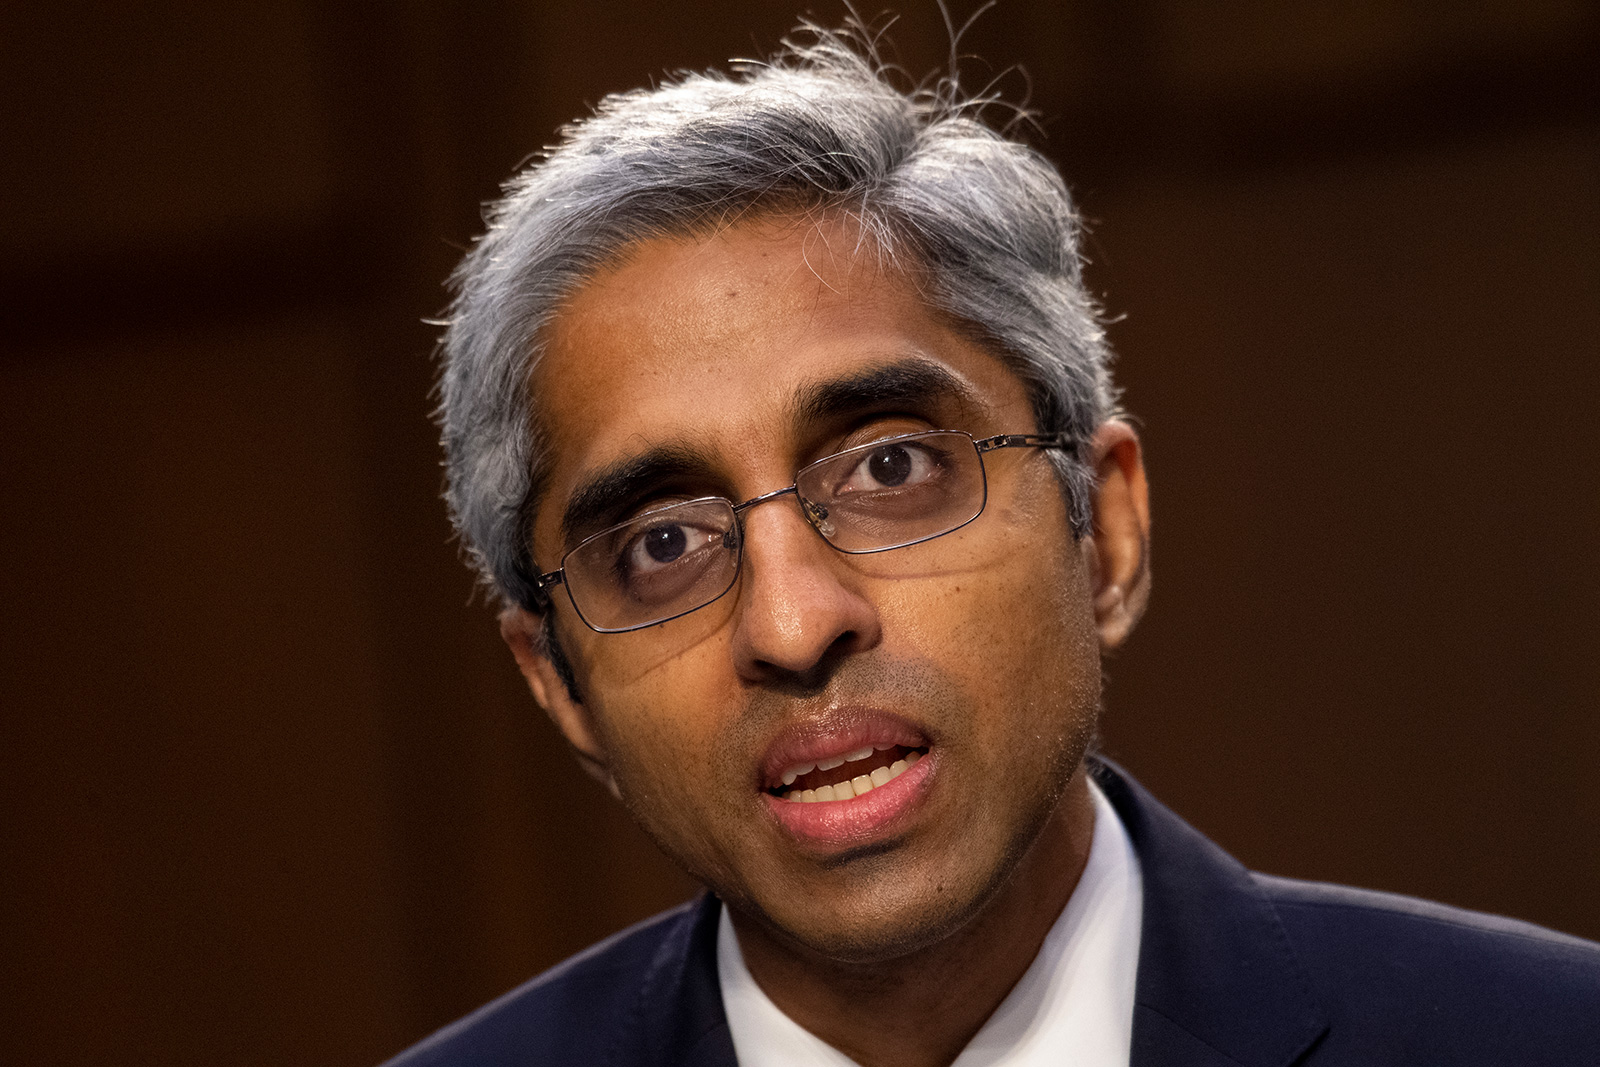 Vivek Murthy testifies at his confirmation hearing before the Senate Health, Education, Labor, and Pensions Committee February 25 on Capitol Hill in Washington, DC.